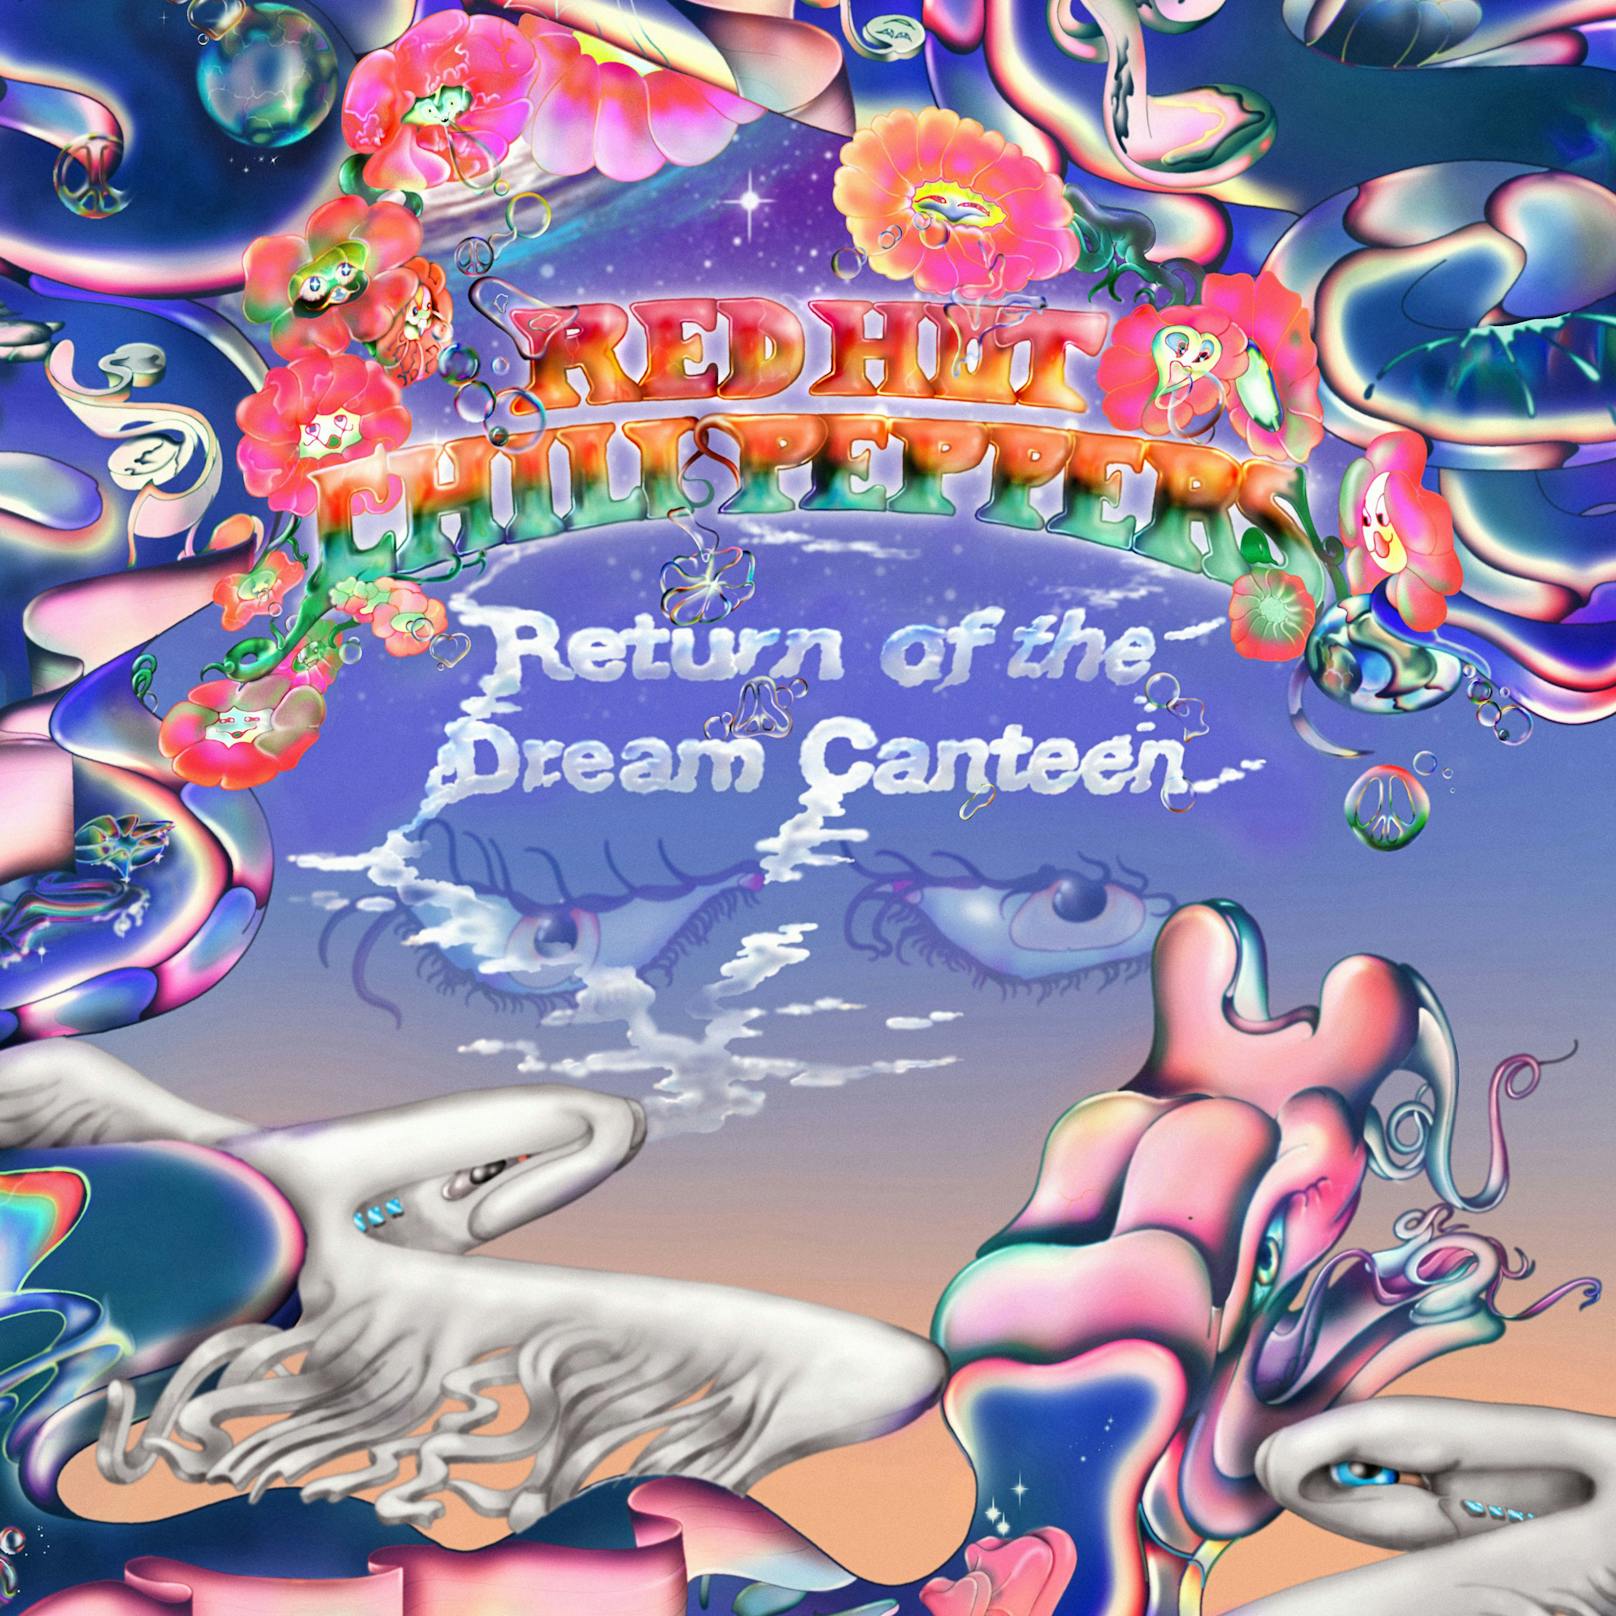 "Return Of The Dream Canteen"